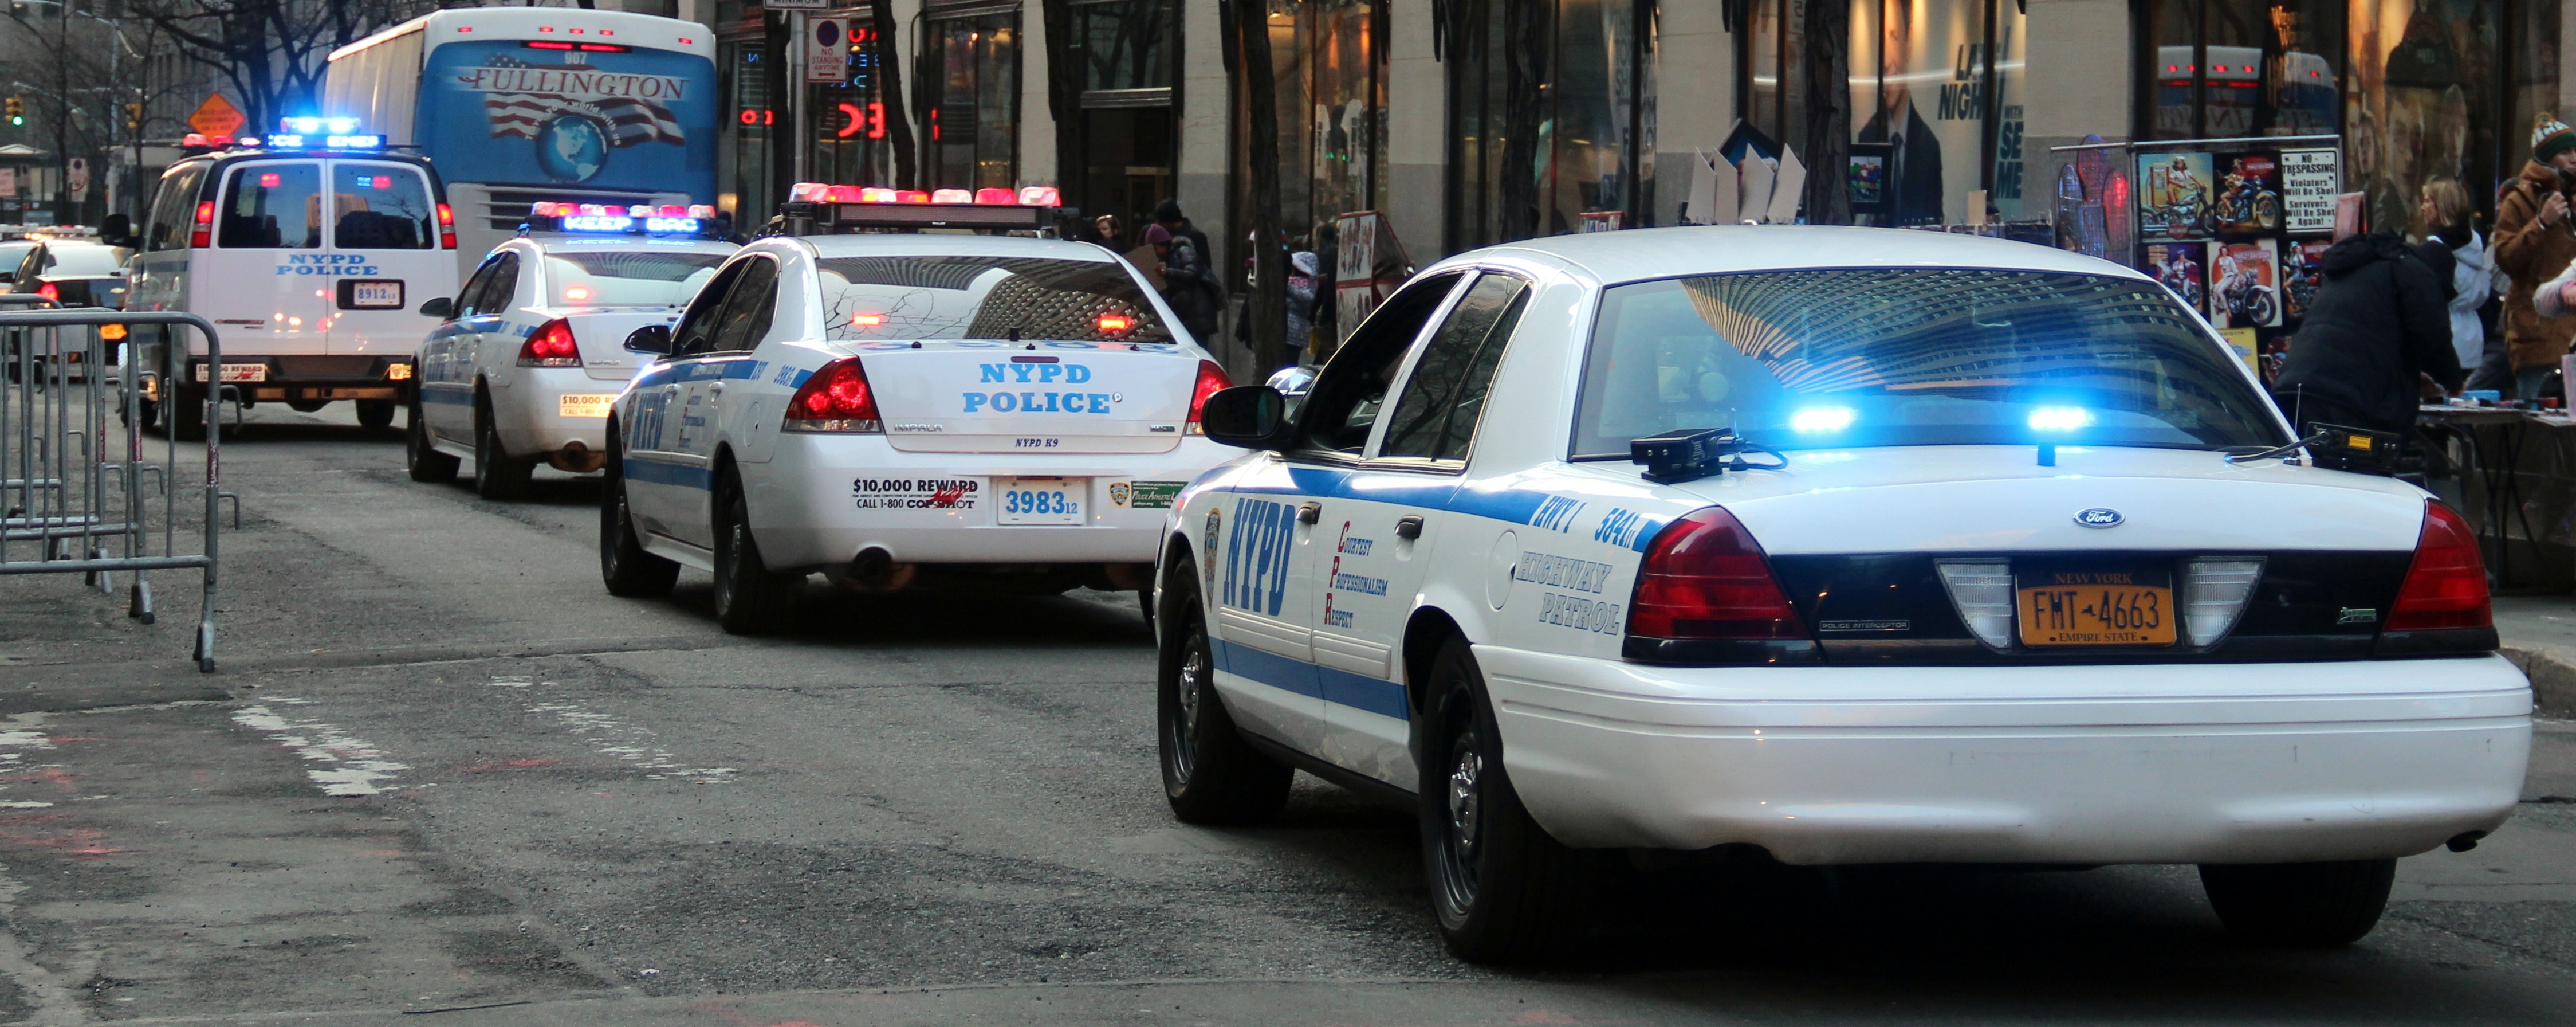 Court monitor finds NYPD still in need of reform to ensure constitutional policing